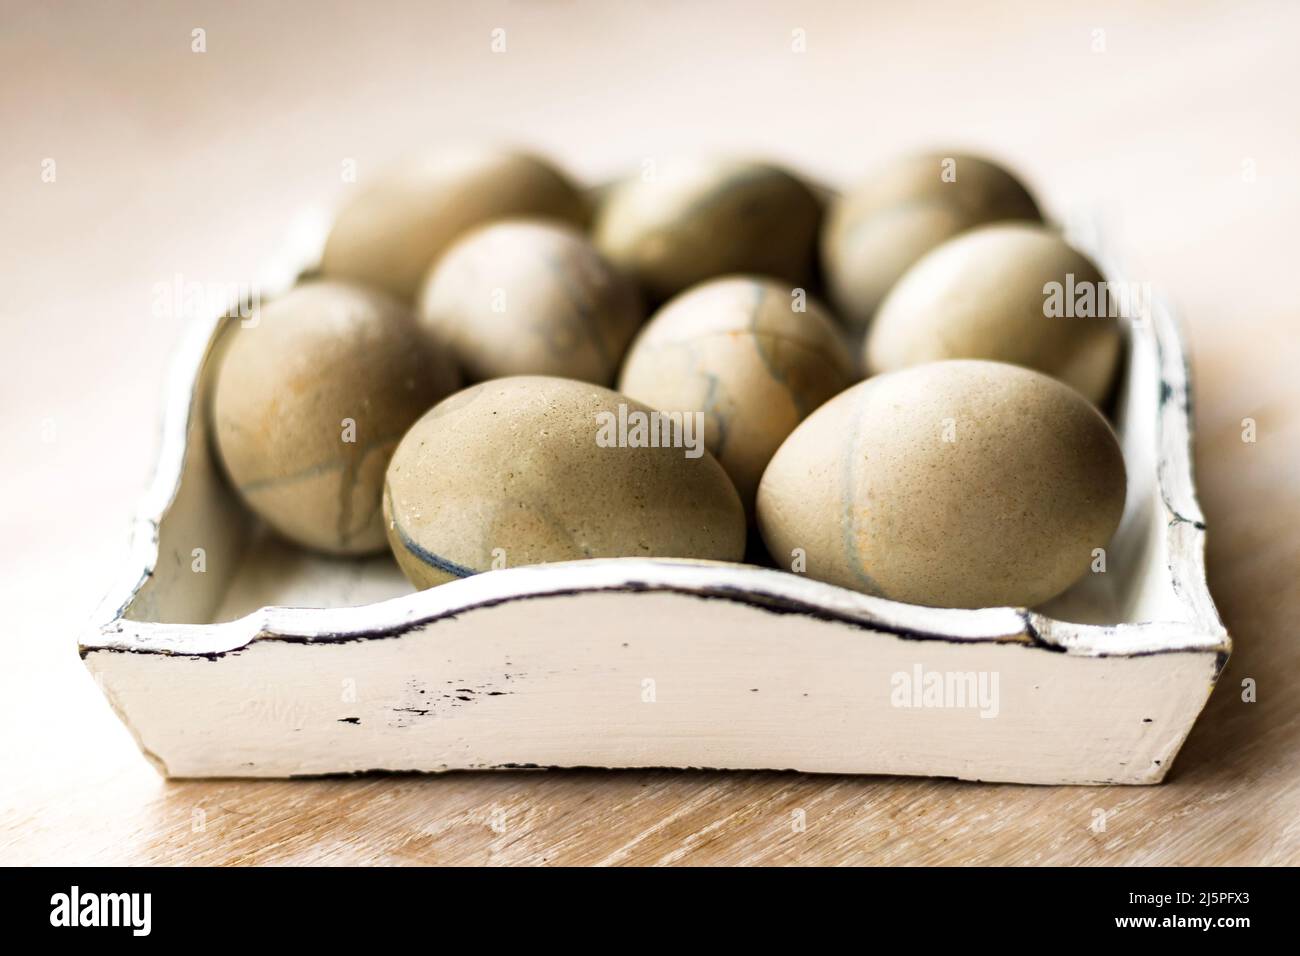 Group of homemade gibiscus painted colored easter eggs on white rustic wooden tray, table background Stock Photo